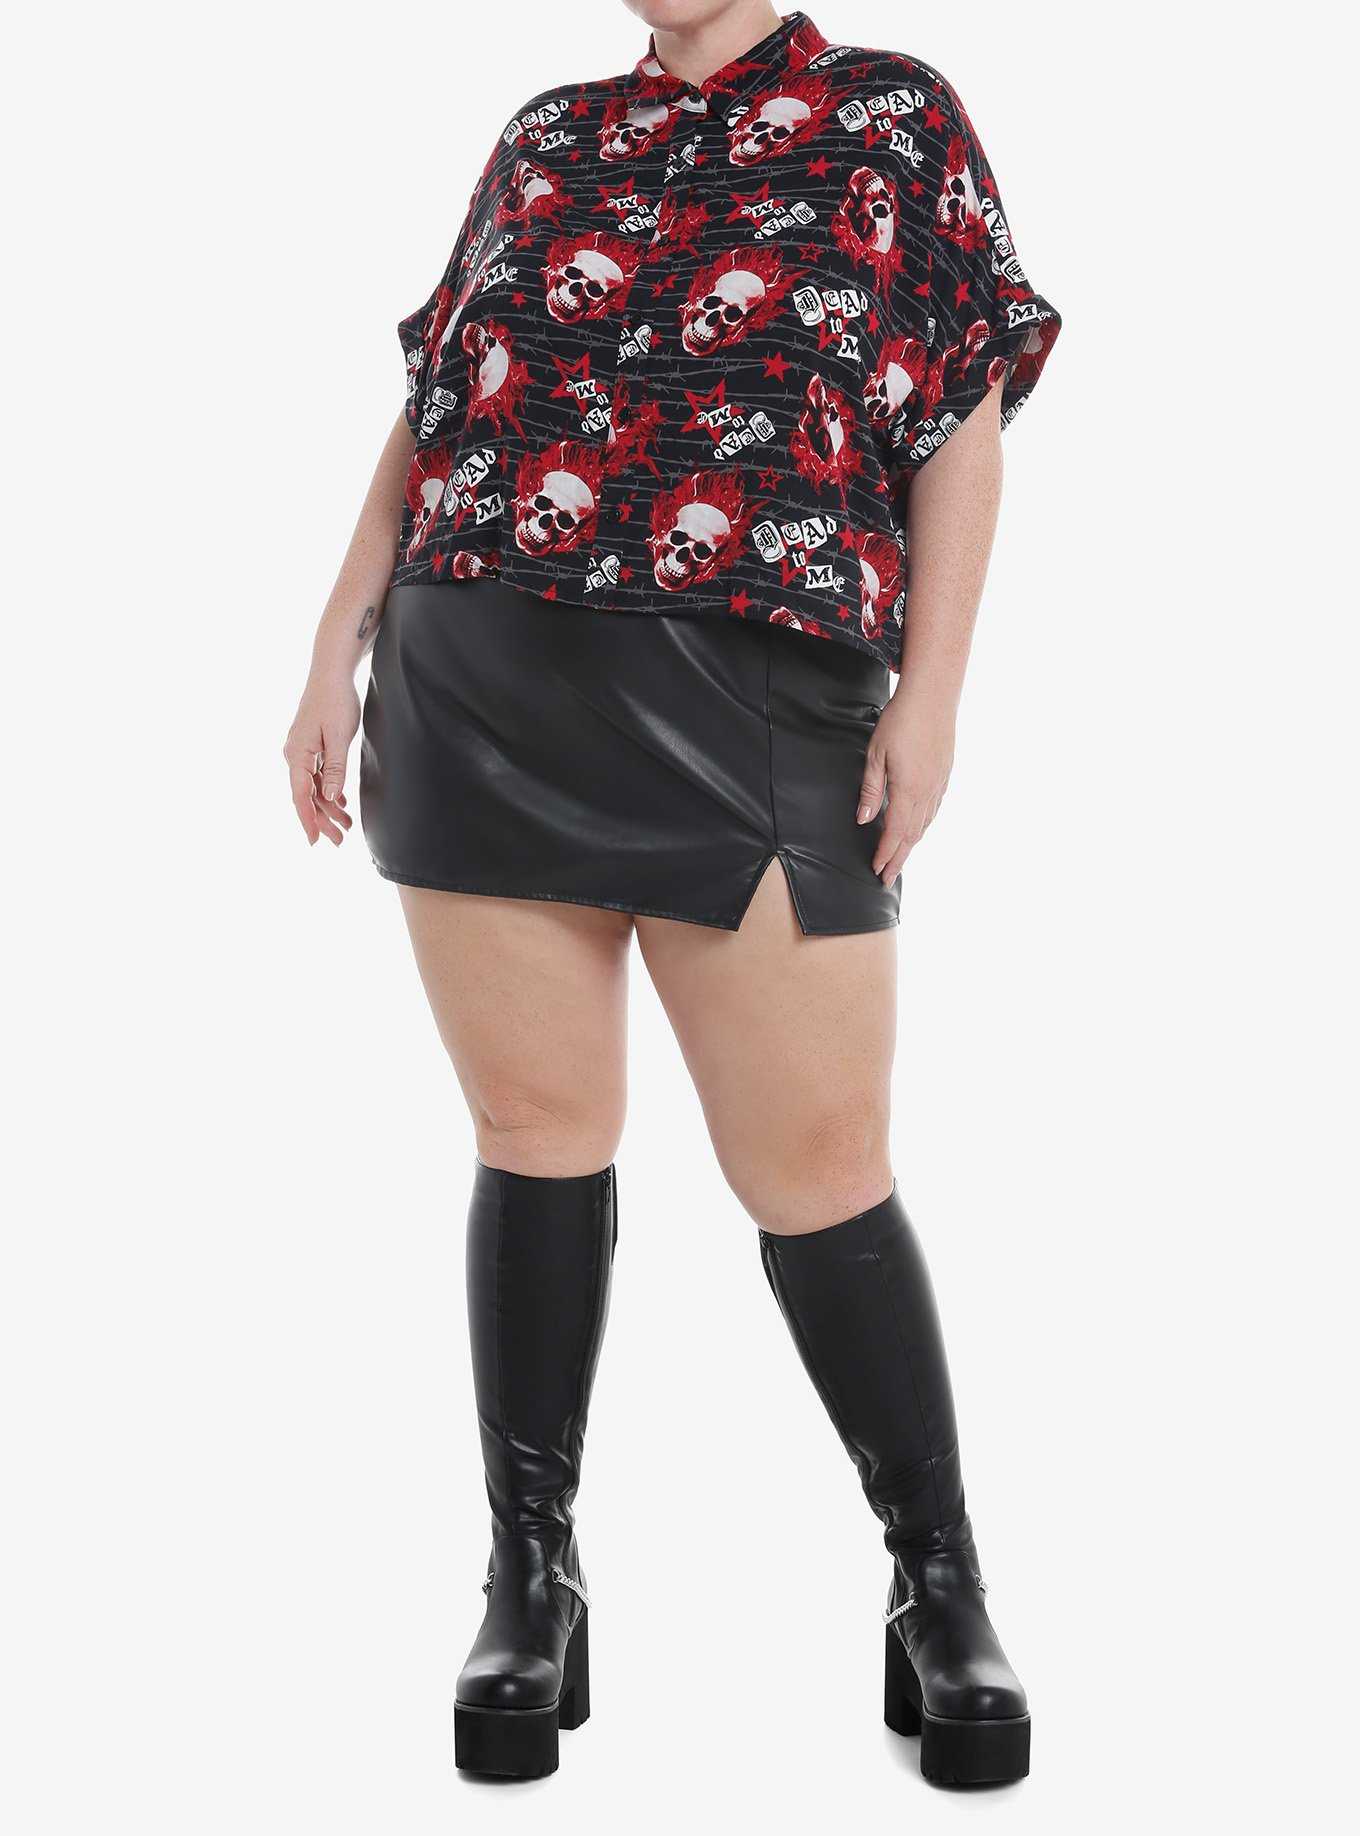 Social Collision Flaming Skulls Allover Print Girls Woven Button-Up Plus Size, , hi-res